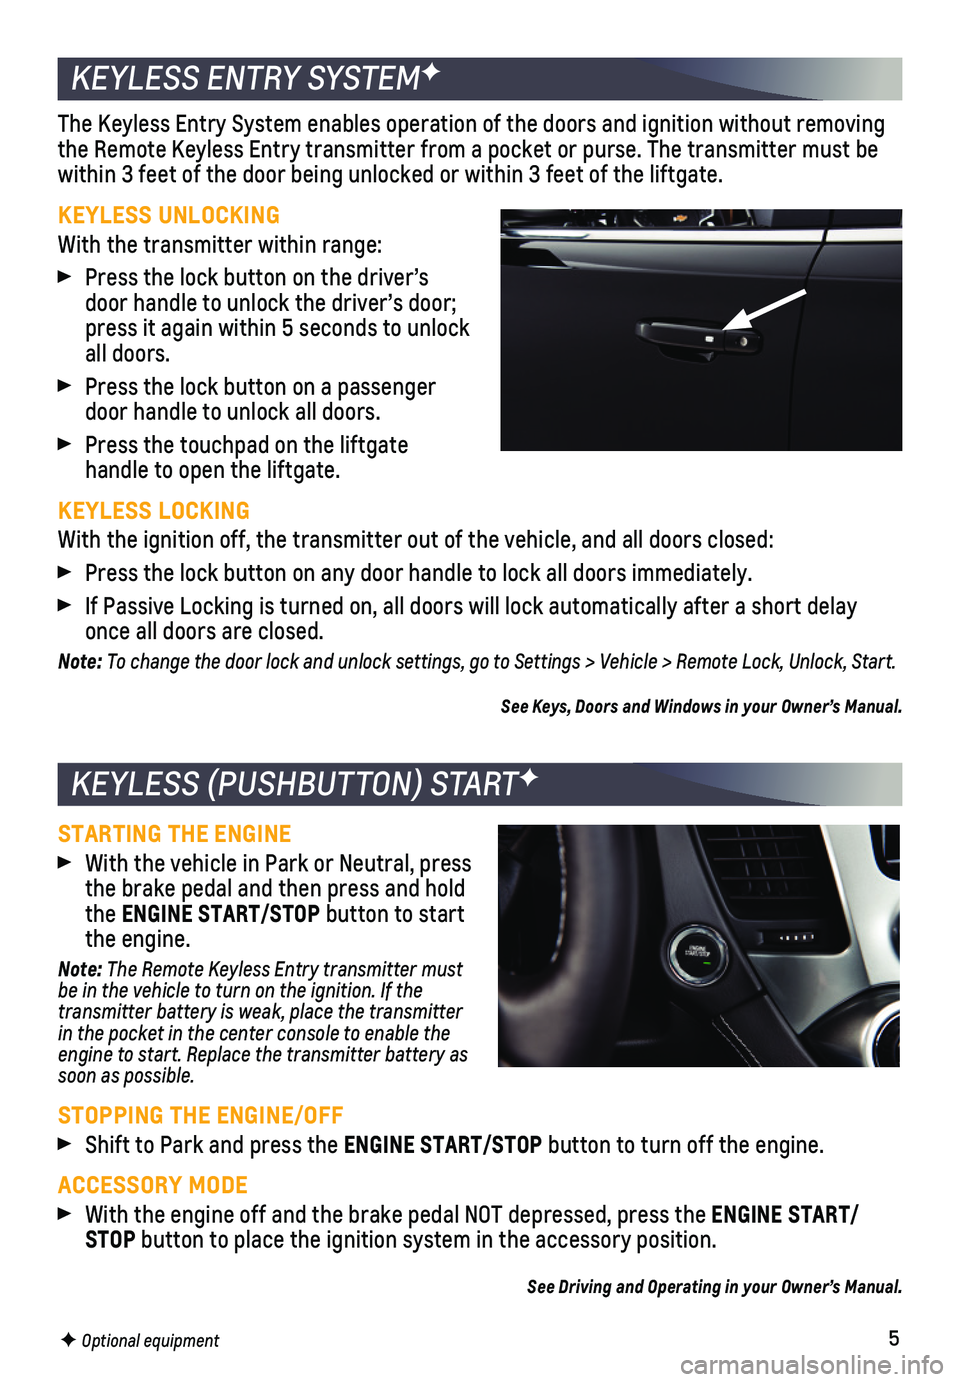 CHEVROLET TAHOE 2018  Get To Know Guide 5
STARTING THE ENGINE  
 With the vehicle in Park or Neutral, press the brake pedal and then press and hold the ENGINE START/STOP button to start the engine.
Note: The Remote Keyless Entry transmitter